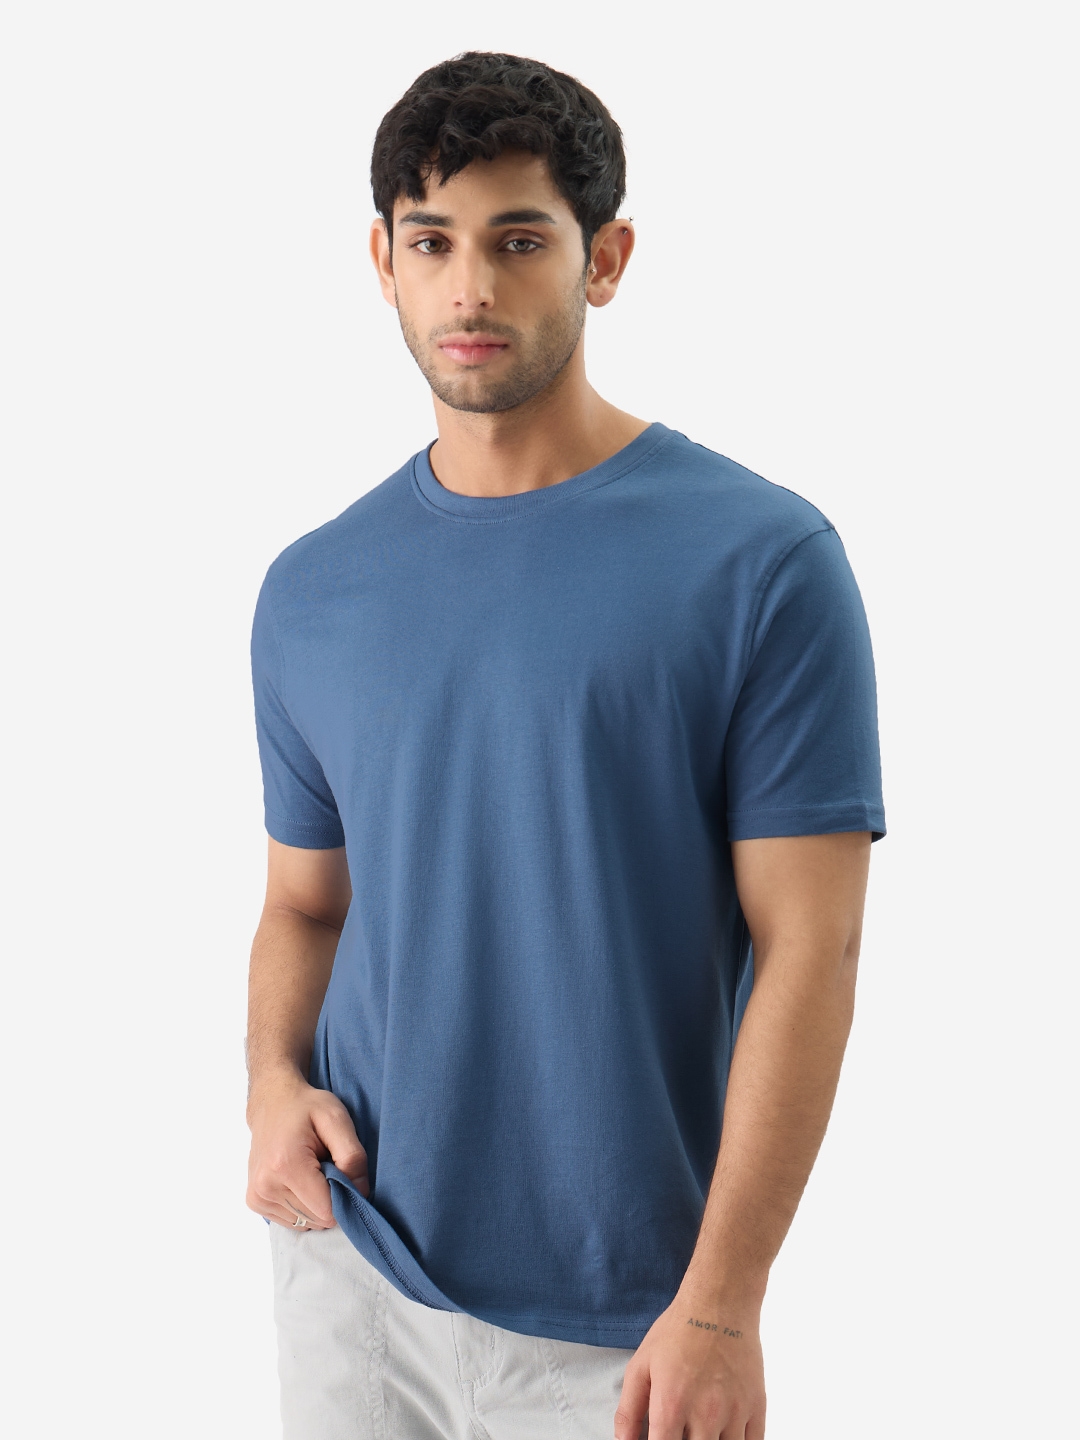 The Souled Store | Men's Classic Sustainable Tee: Indigo Bliss T-Shirt